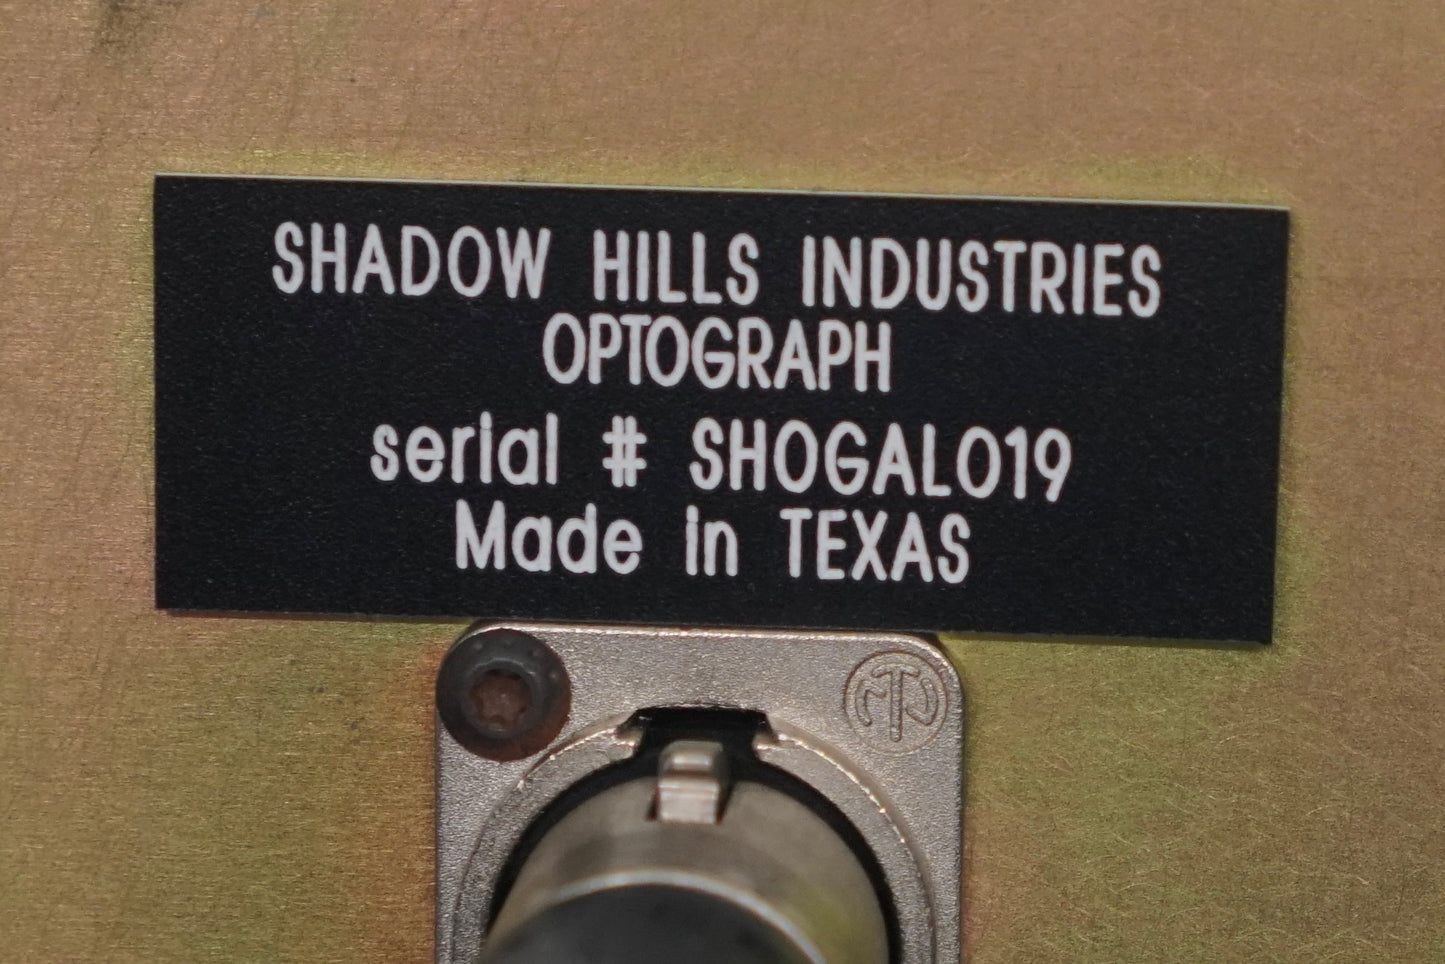 Shadow Hills Optograph